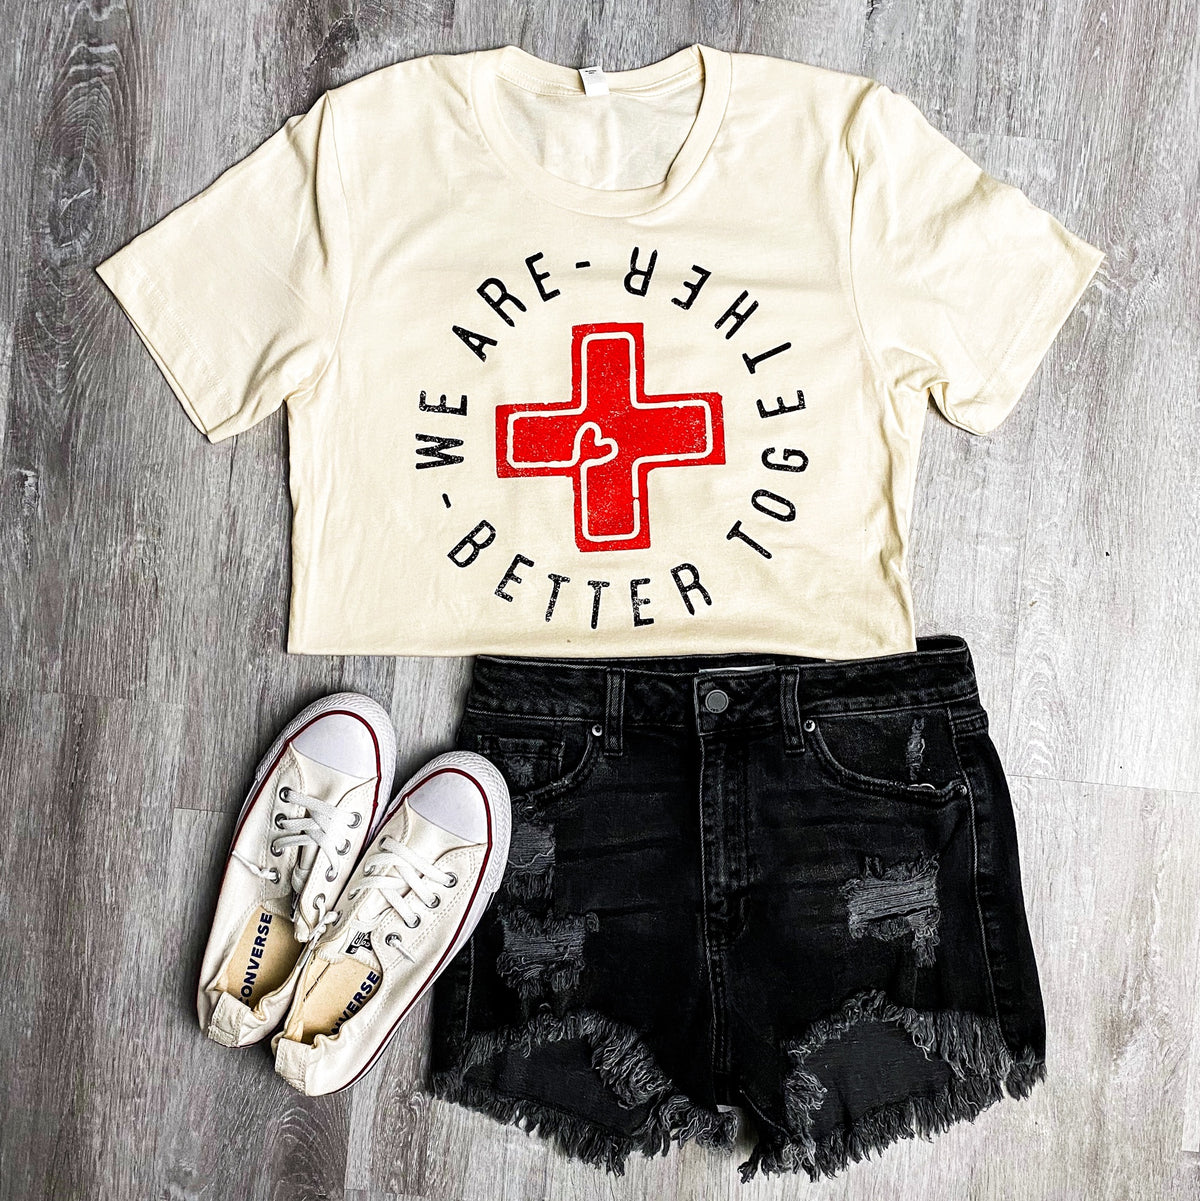 Save local better together unisex short sleeve t-shirt cream - Cute T-shirts - Trendy Graphic T-Shirts at Lush Fashion Lounge Boutique in Oklahoma City